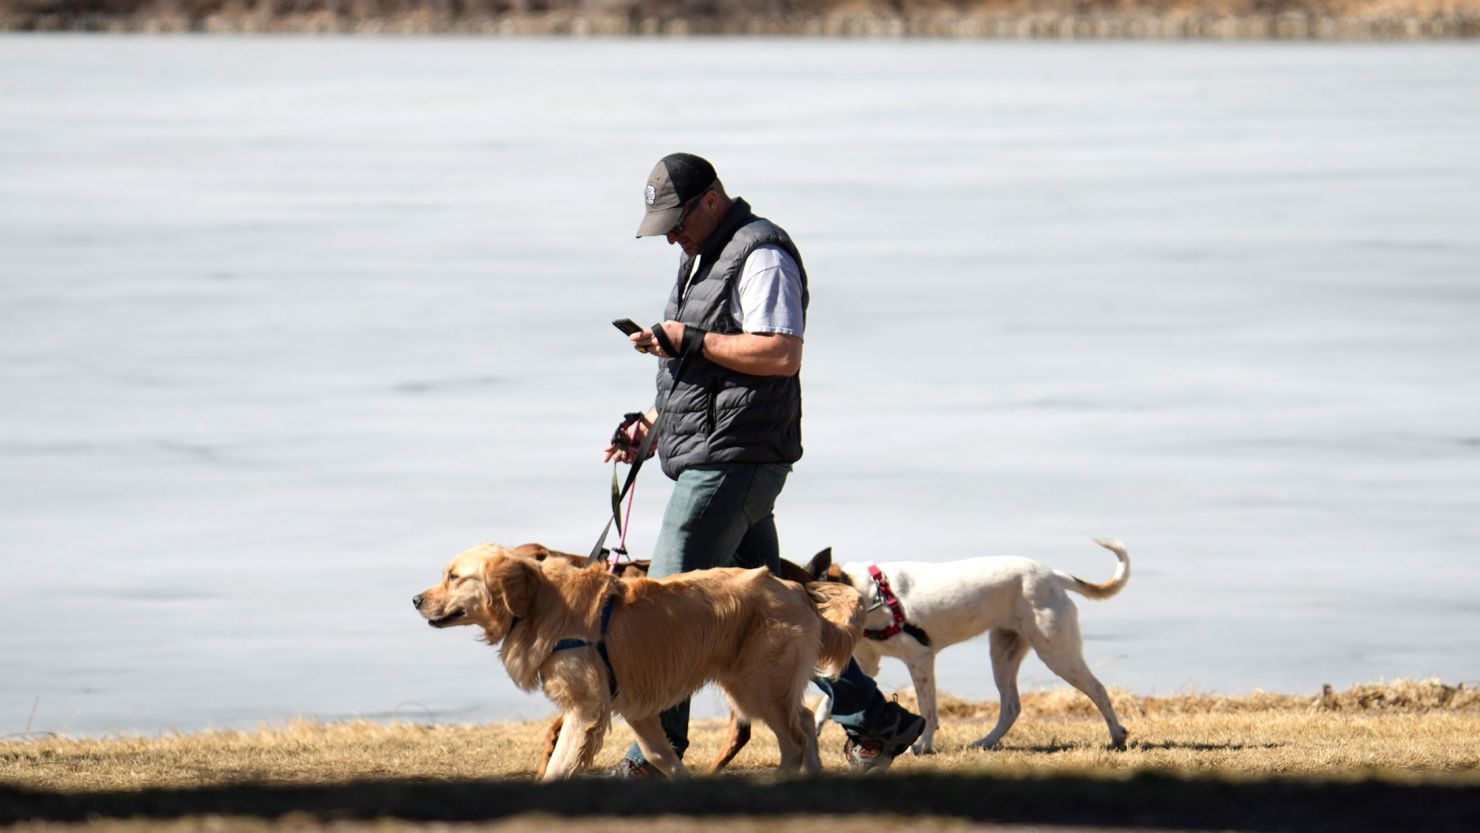 A dog walker checks a mobile device while guiding dogs to take advantage of temperatures near 60 degrees Fahrenheit while passing by an ice-covered lake in Washington Park Tuesday, Feb. 21, 2023, in Denver. Forecasters are predicting that a dangerous winter storm packing heavy snows and high winds will sweep over the intermountain West late Tuesday and Wednesday, prompting the issuing of snow advisory warnings across the region. (AP Photo/David Zalubowski)